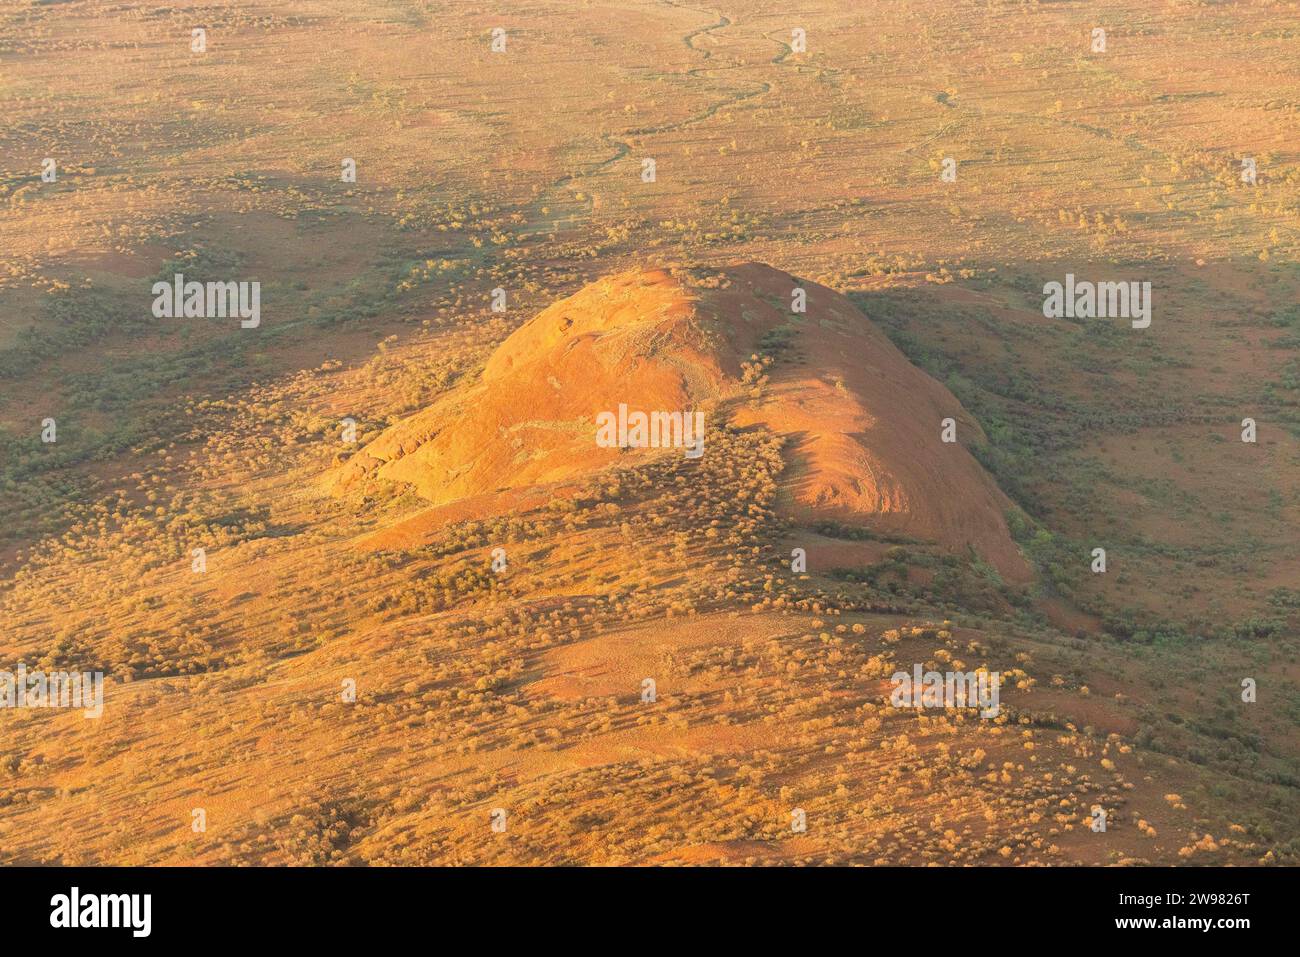 An aerial view of a large sandstone formation. Australia Stock Photo